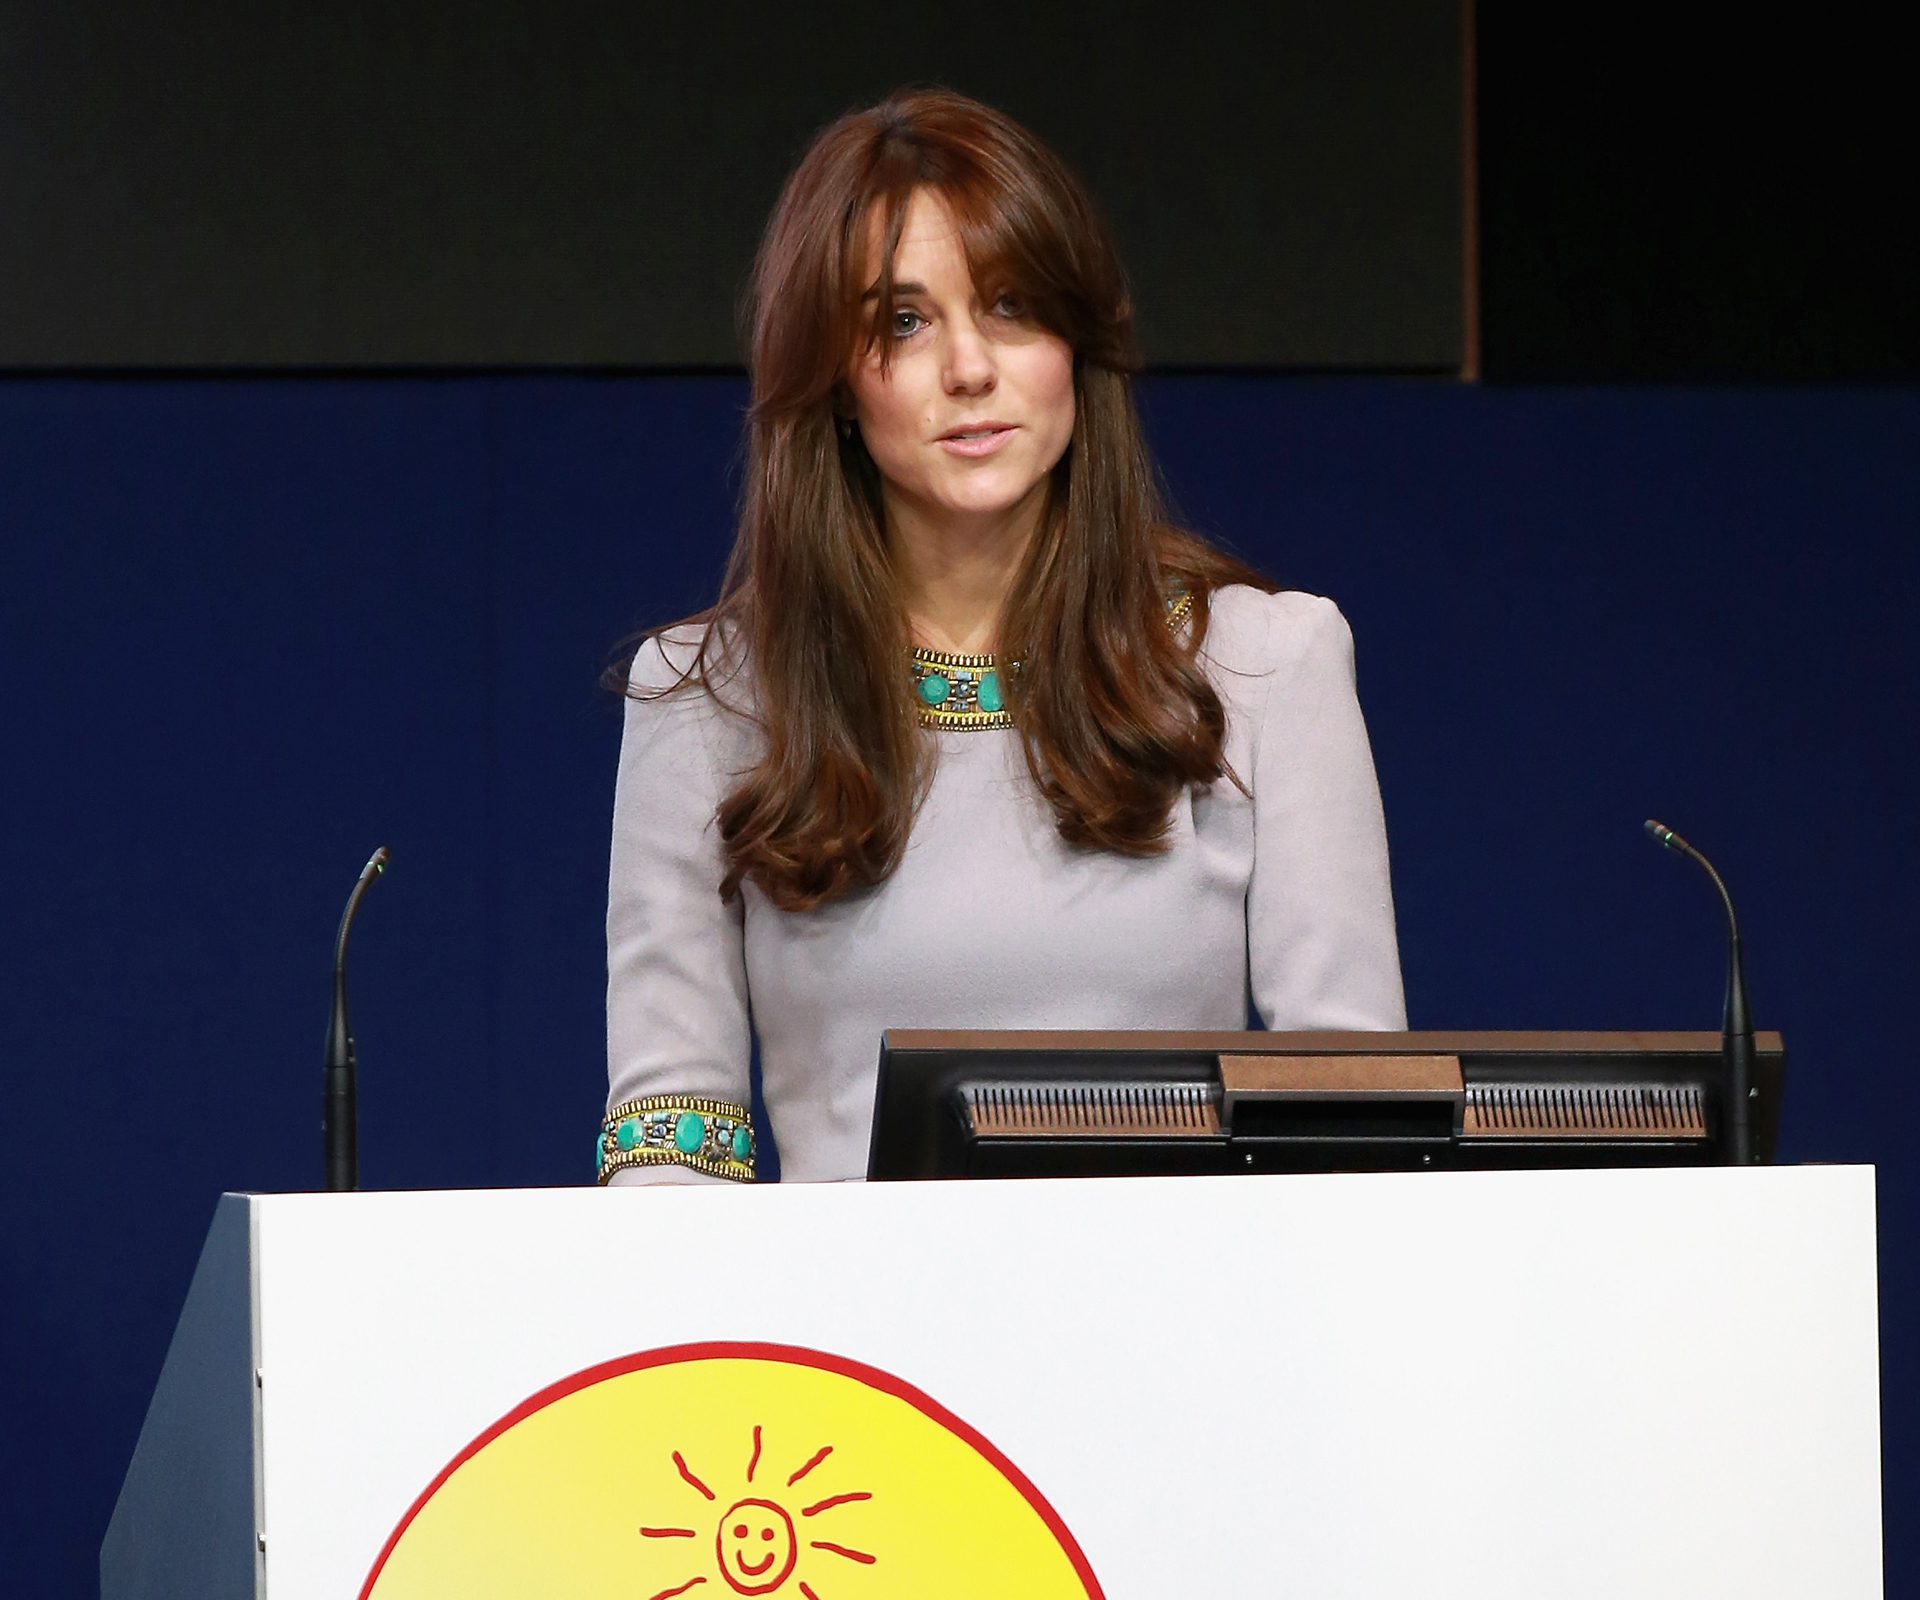 The Duchess of Cambridge delivers emotional speech on mental health